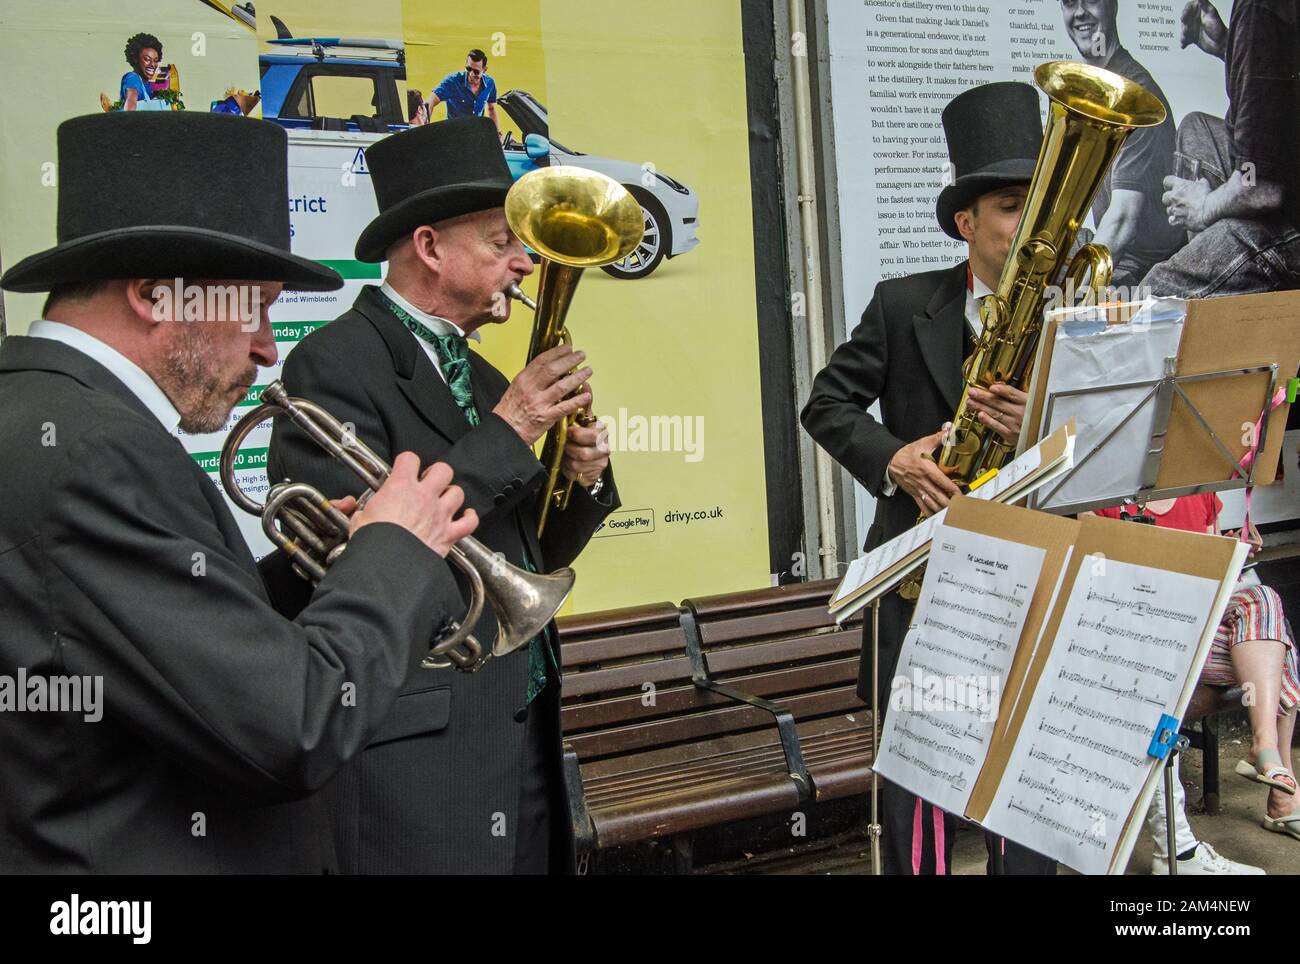 London, UK - June 22, 2019: Musicians playing historic Victorian brass instruments.  Members of the band Queen Victoria's Consort playing historic sax Stock Photo